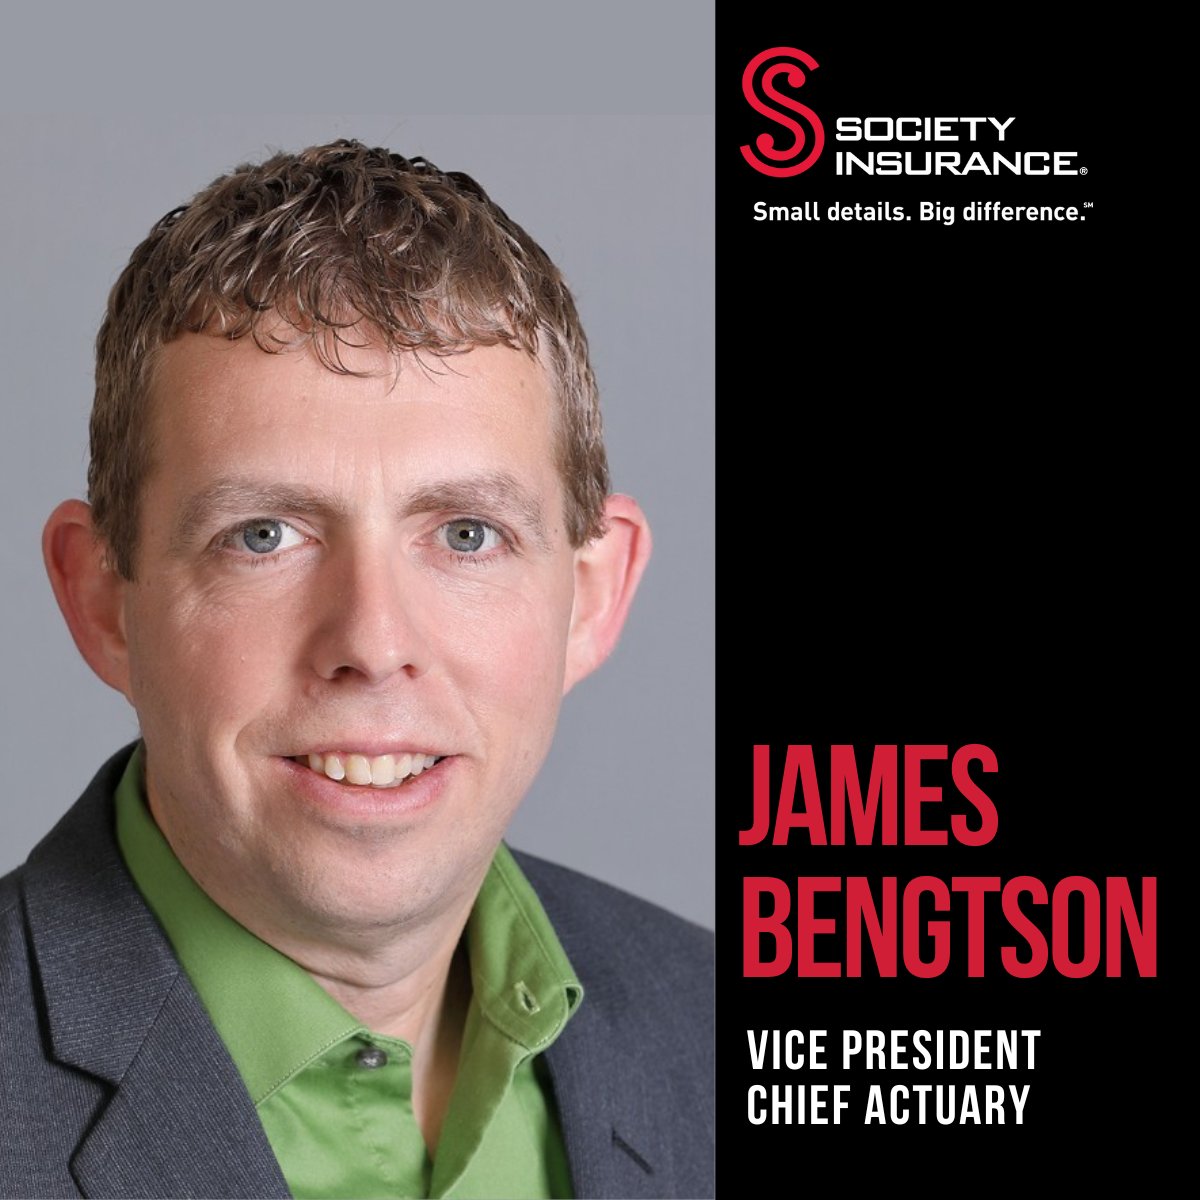 Join us in welcoming James Bengtson, vice president-chief actuary, to the Society Insurance executive team.